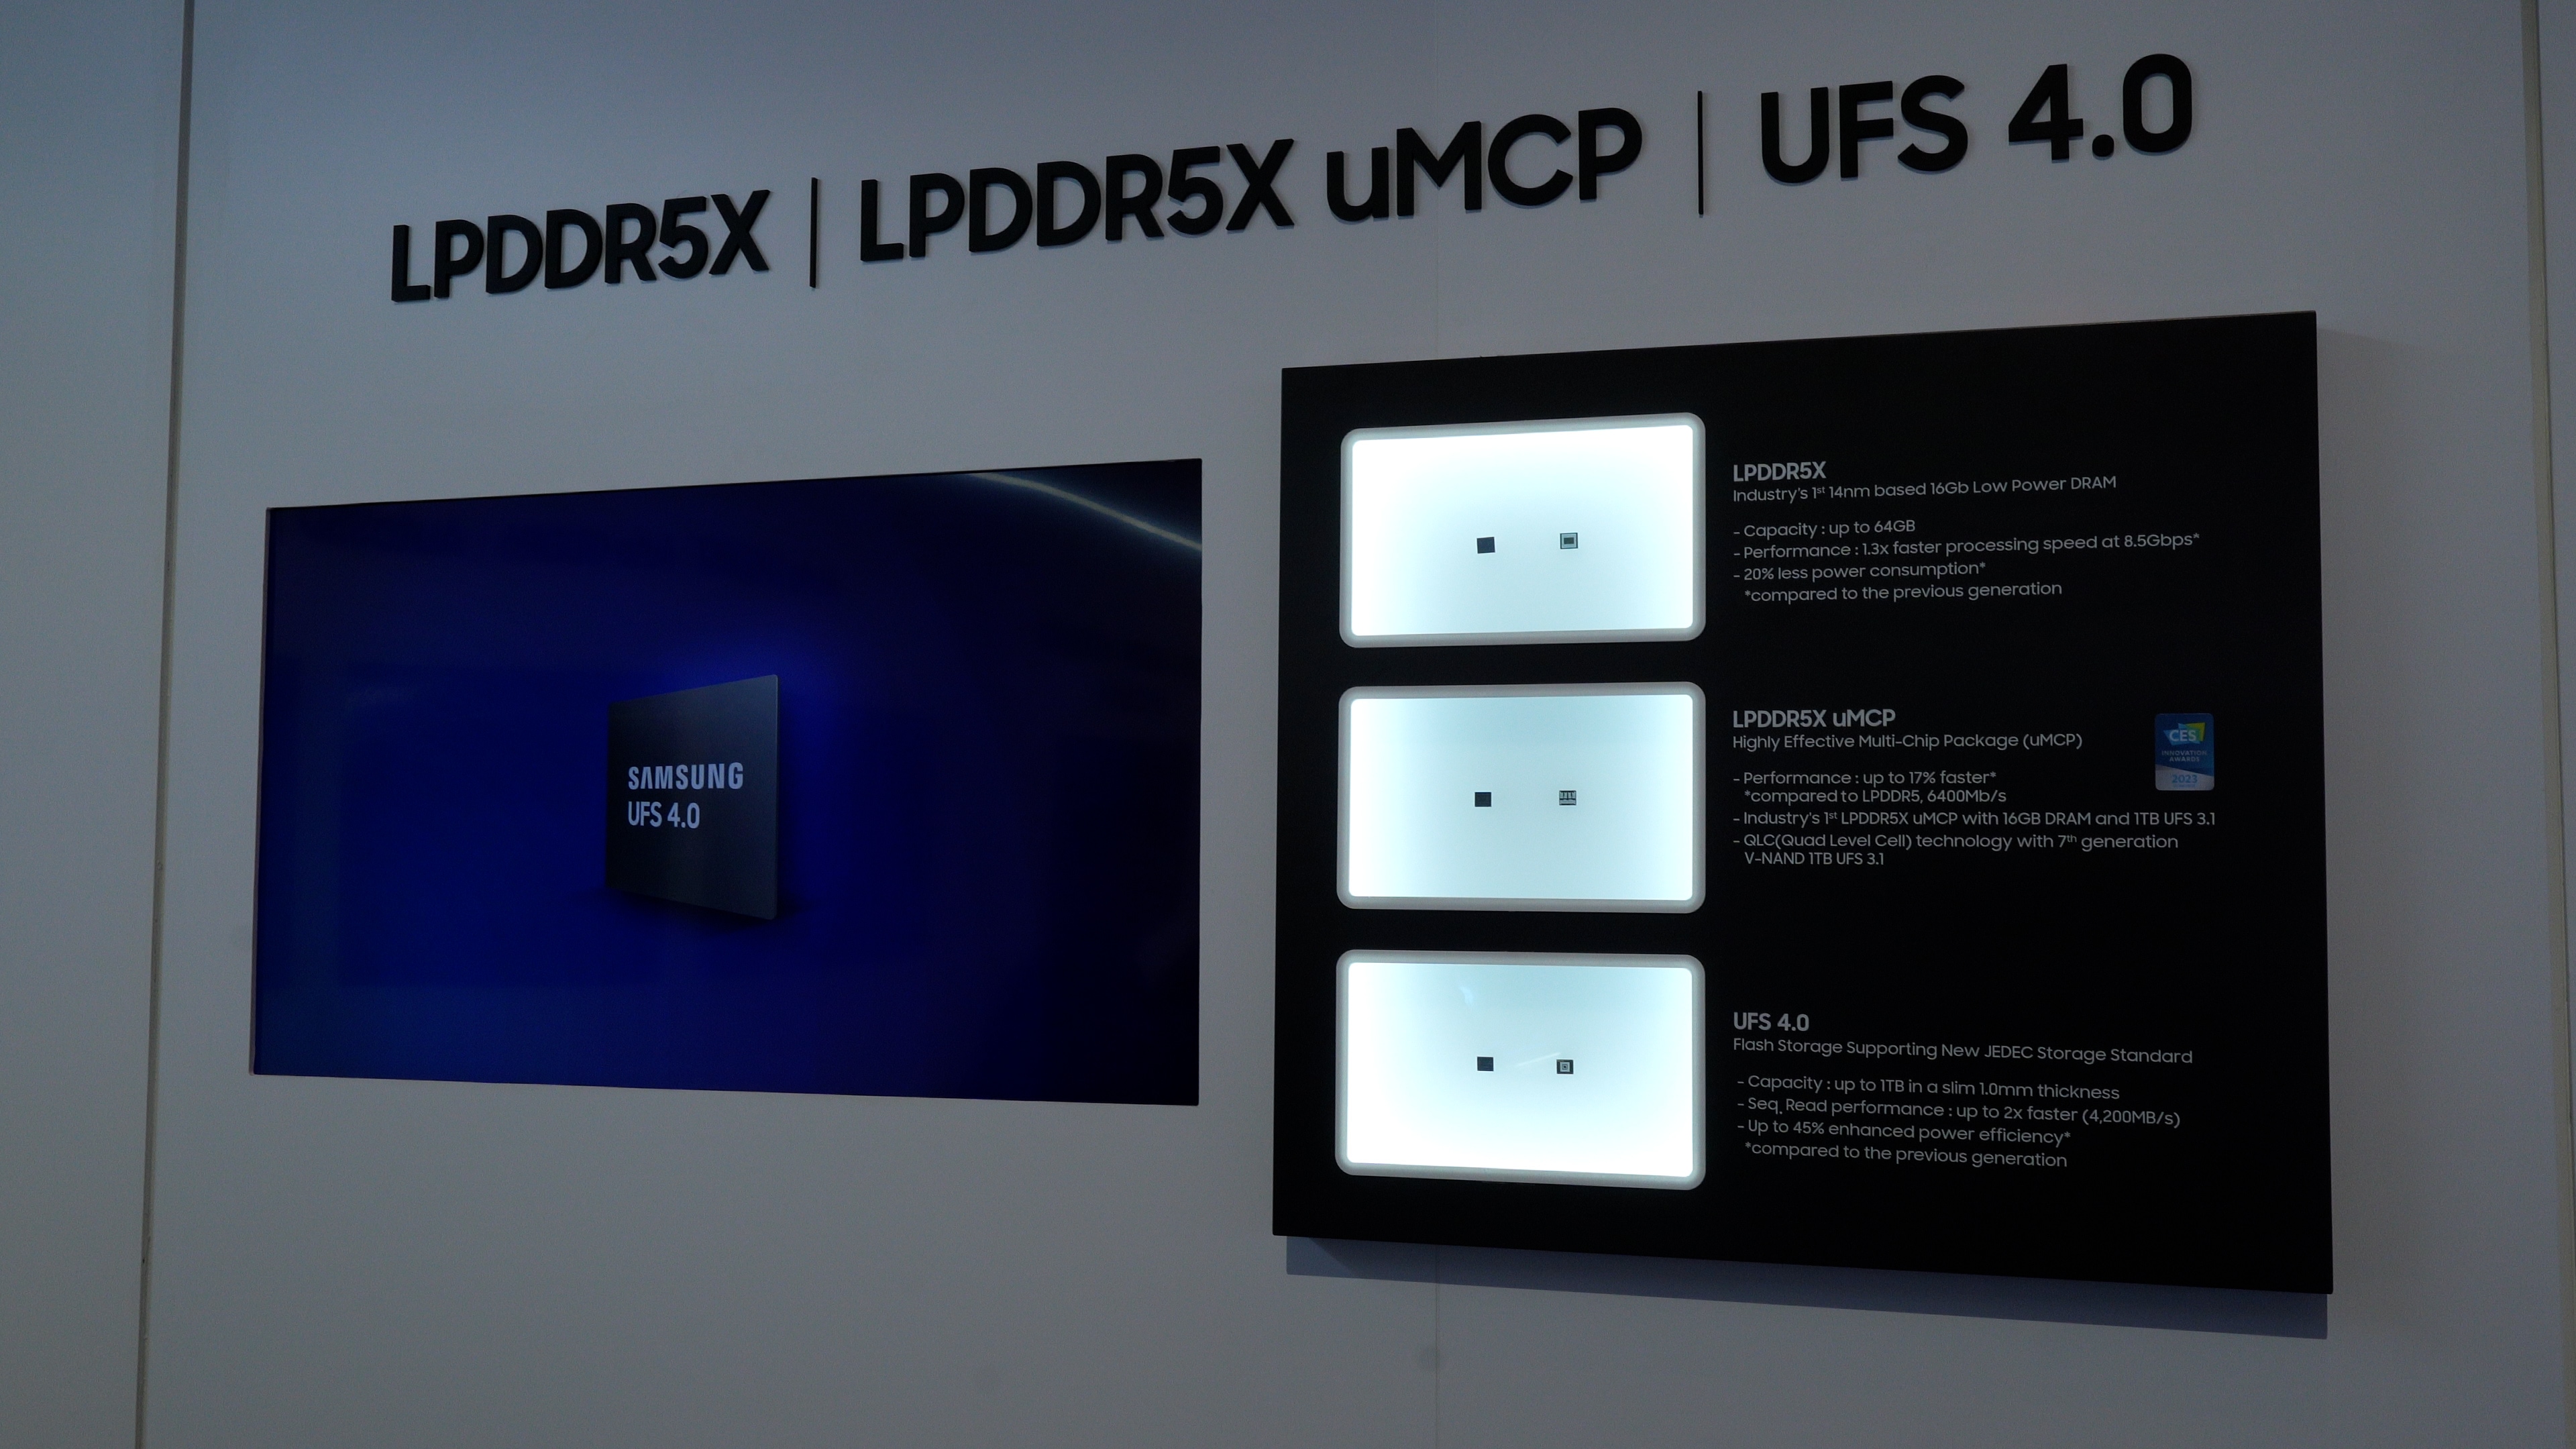 Samsung’s LPDDR5X, uMCP and UFS 4.0 technologies are showcased, detailing their improved performances in small form factors.